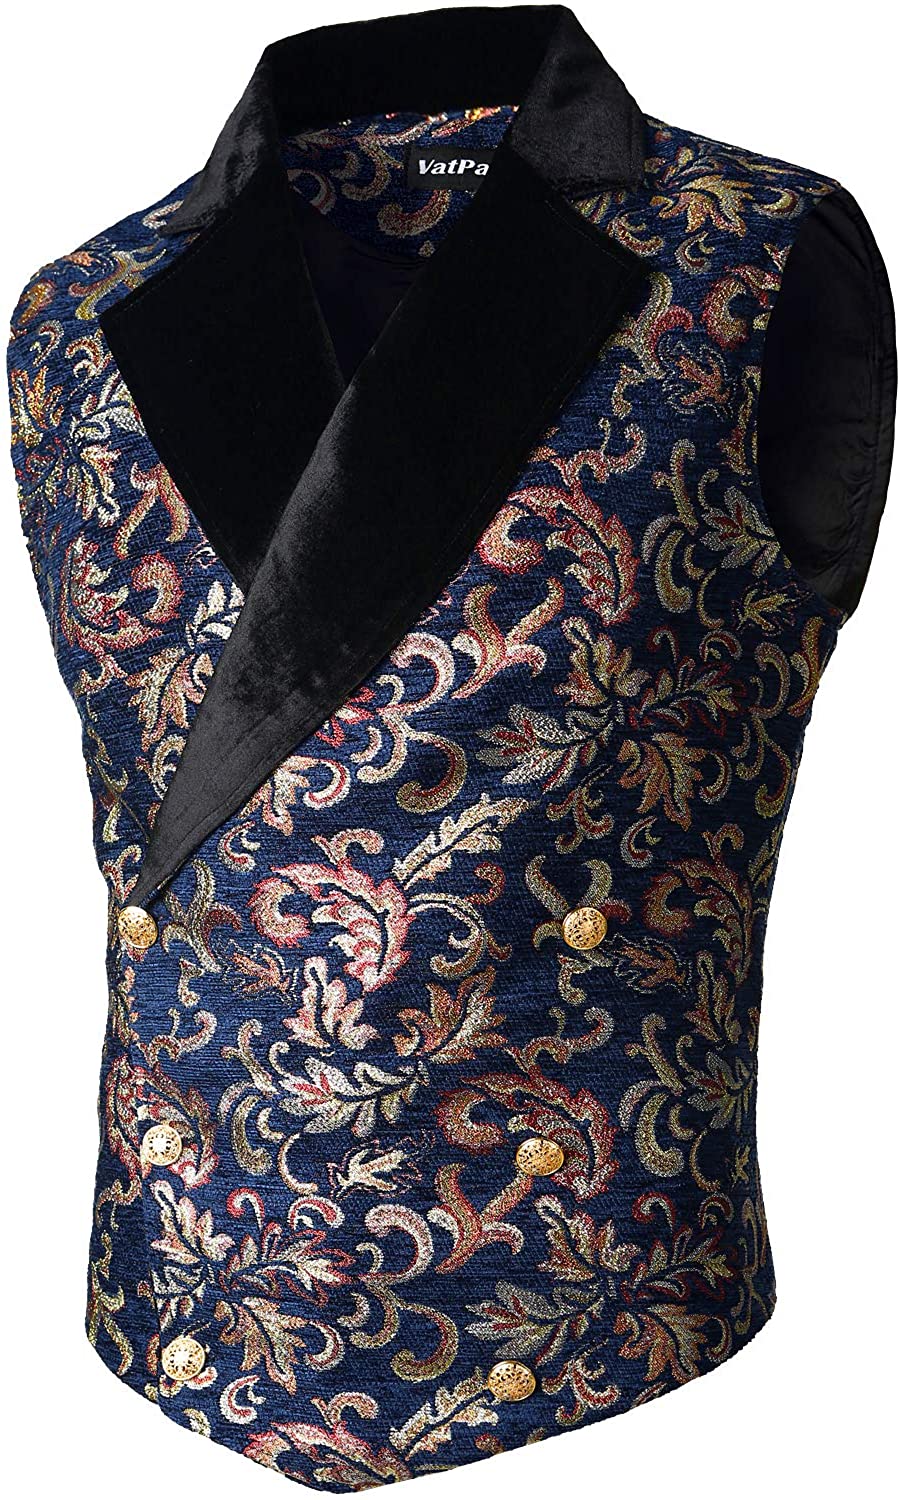 VATPAVE Mens Victorian Double Breasted Vest Gothic Steampunk Waistcoat ...